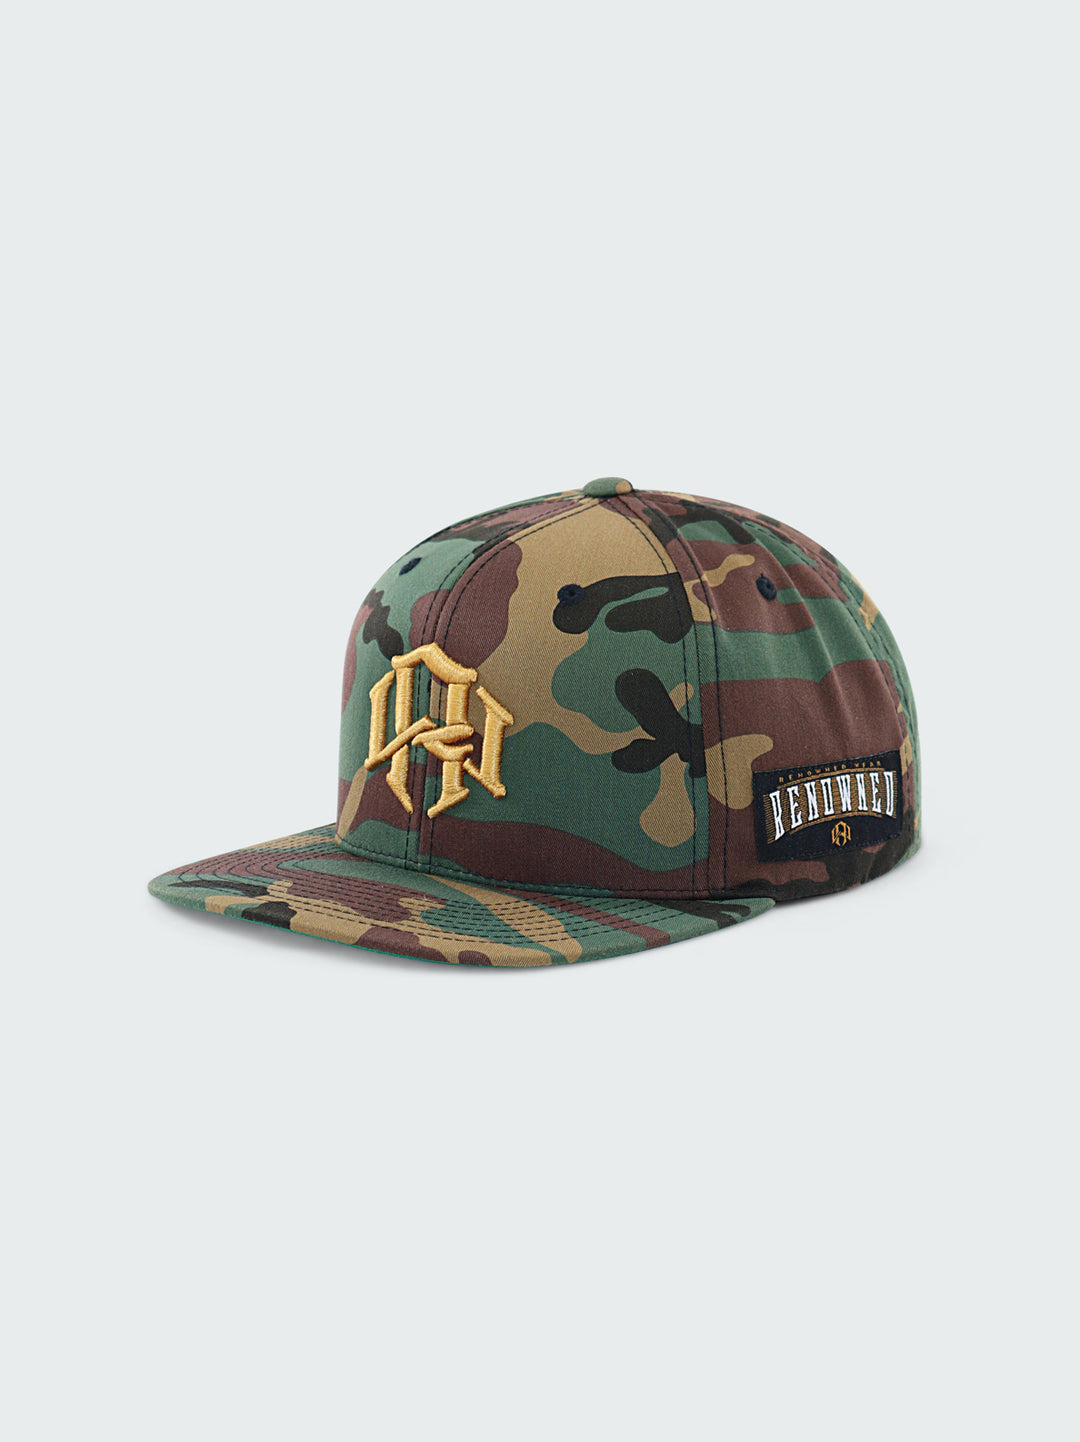 Camo Snapback Cap by RENOWNED WEAR featuring a Gold 3D Embroidered front logo left side woven patch